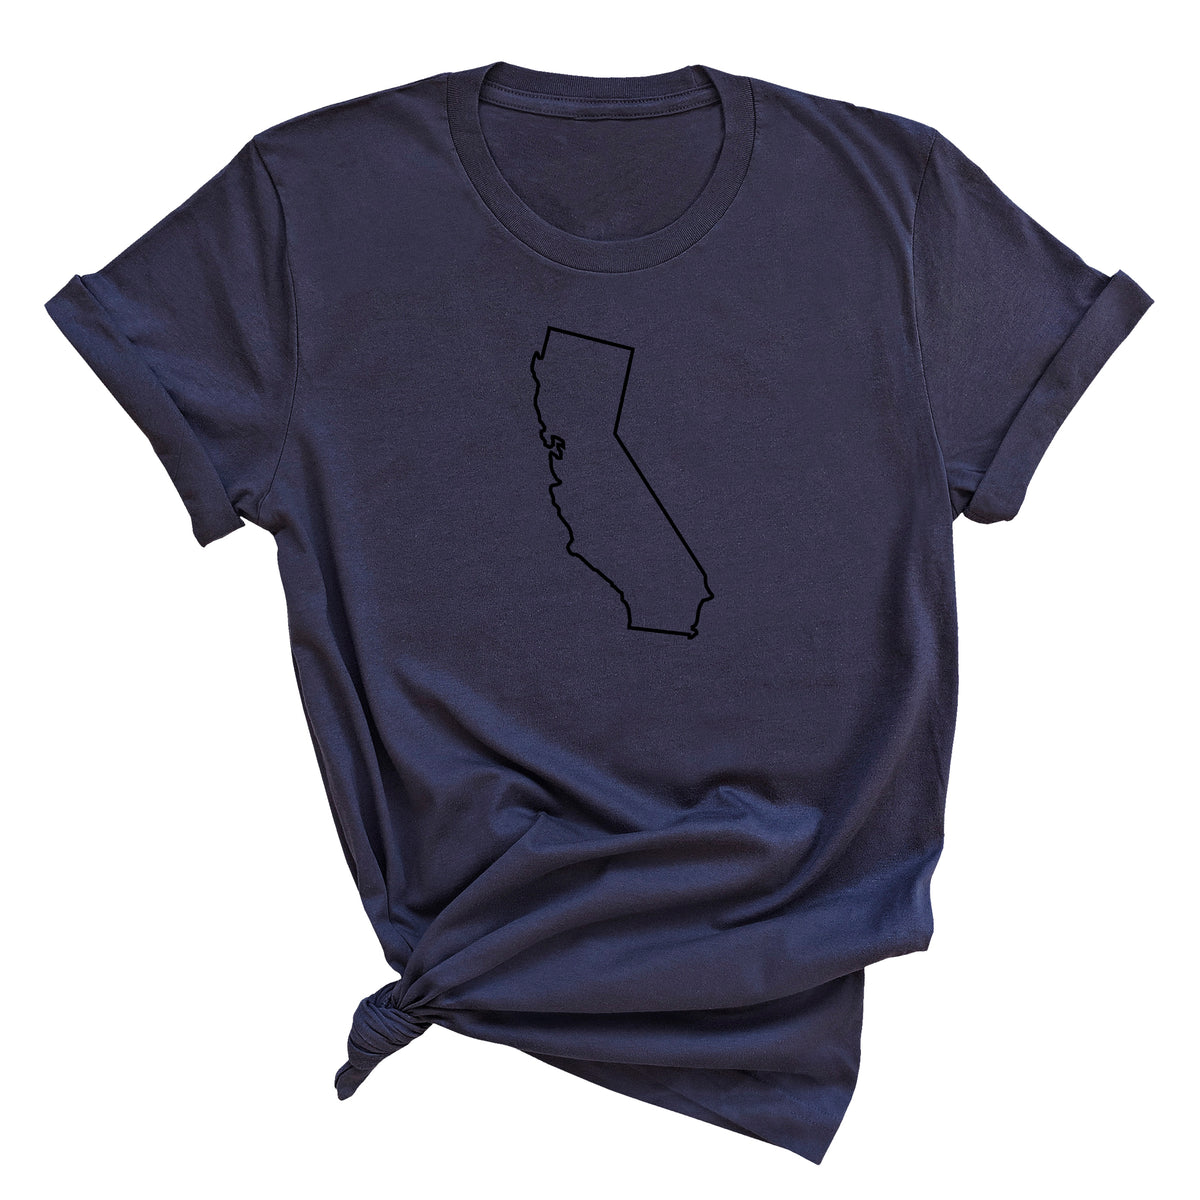 California Home Unisex T-Shirt , Navy T-Shirt, California , Printed Shirt, Scoop Neck Shirt, Crewneck, California Home , DSY Lifestyle Shirt, Made in LA